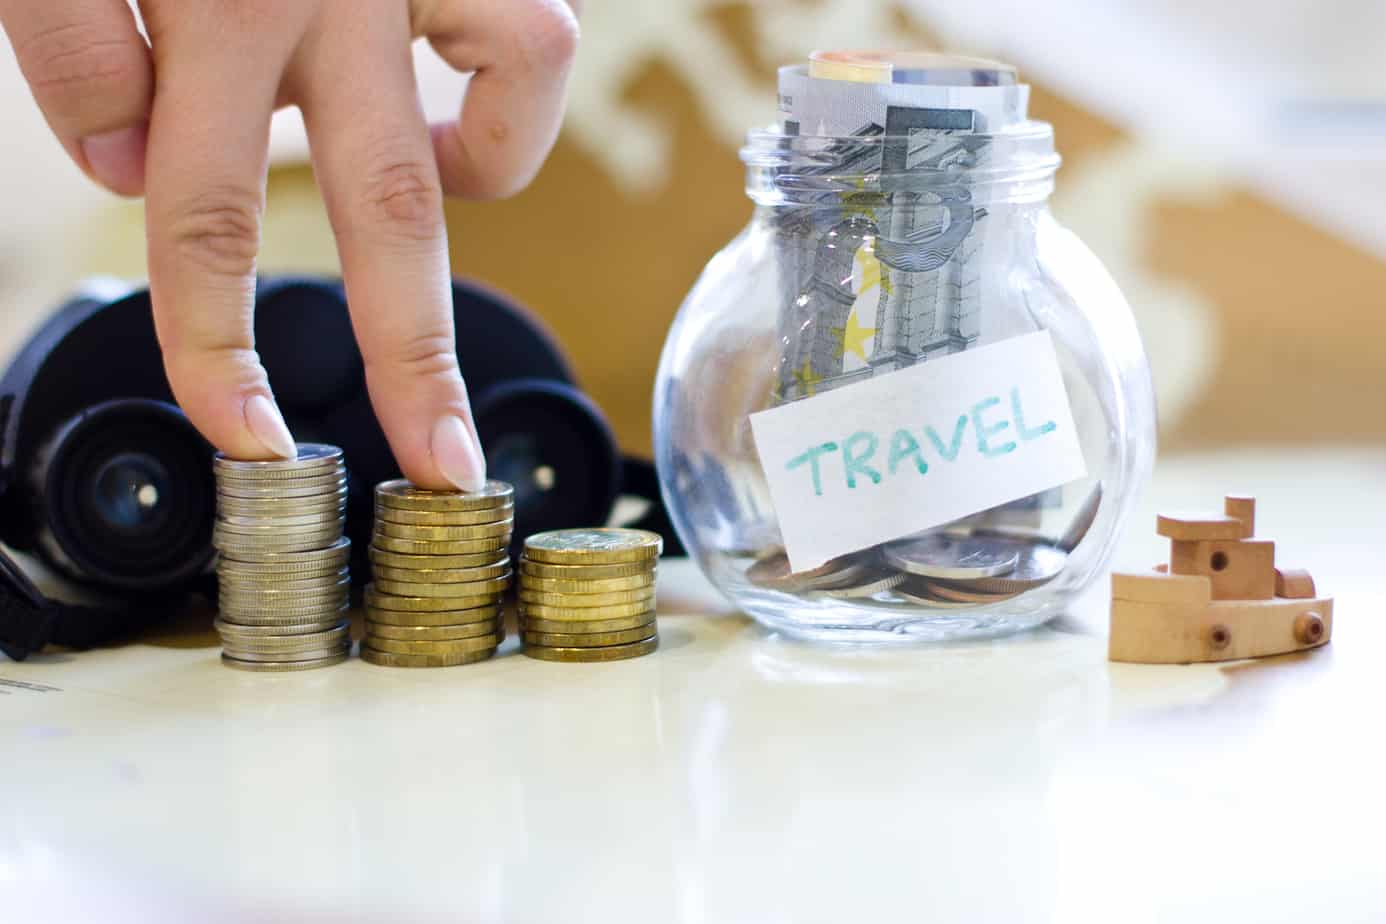 A person's hands are on money next to a money jar that says Travel